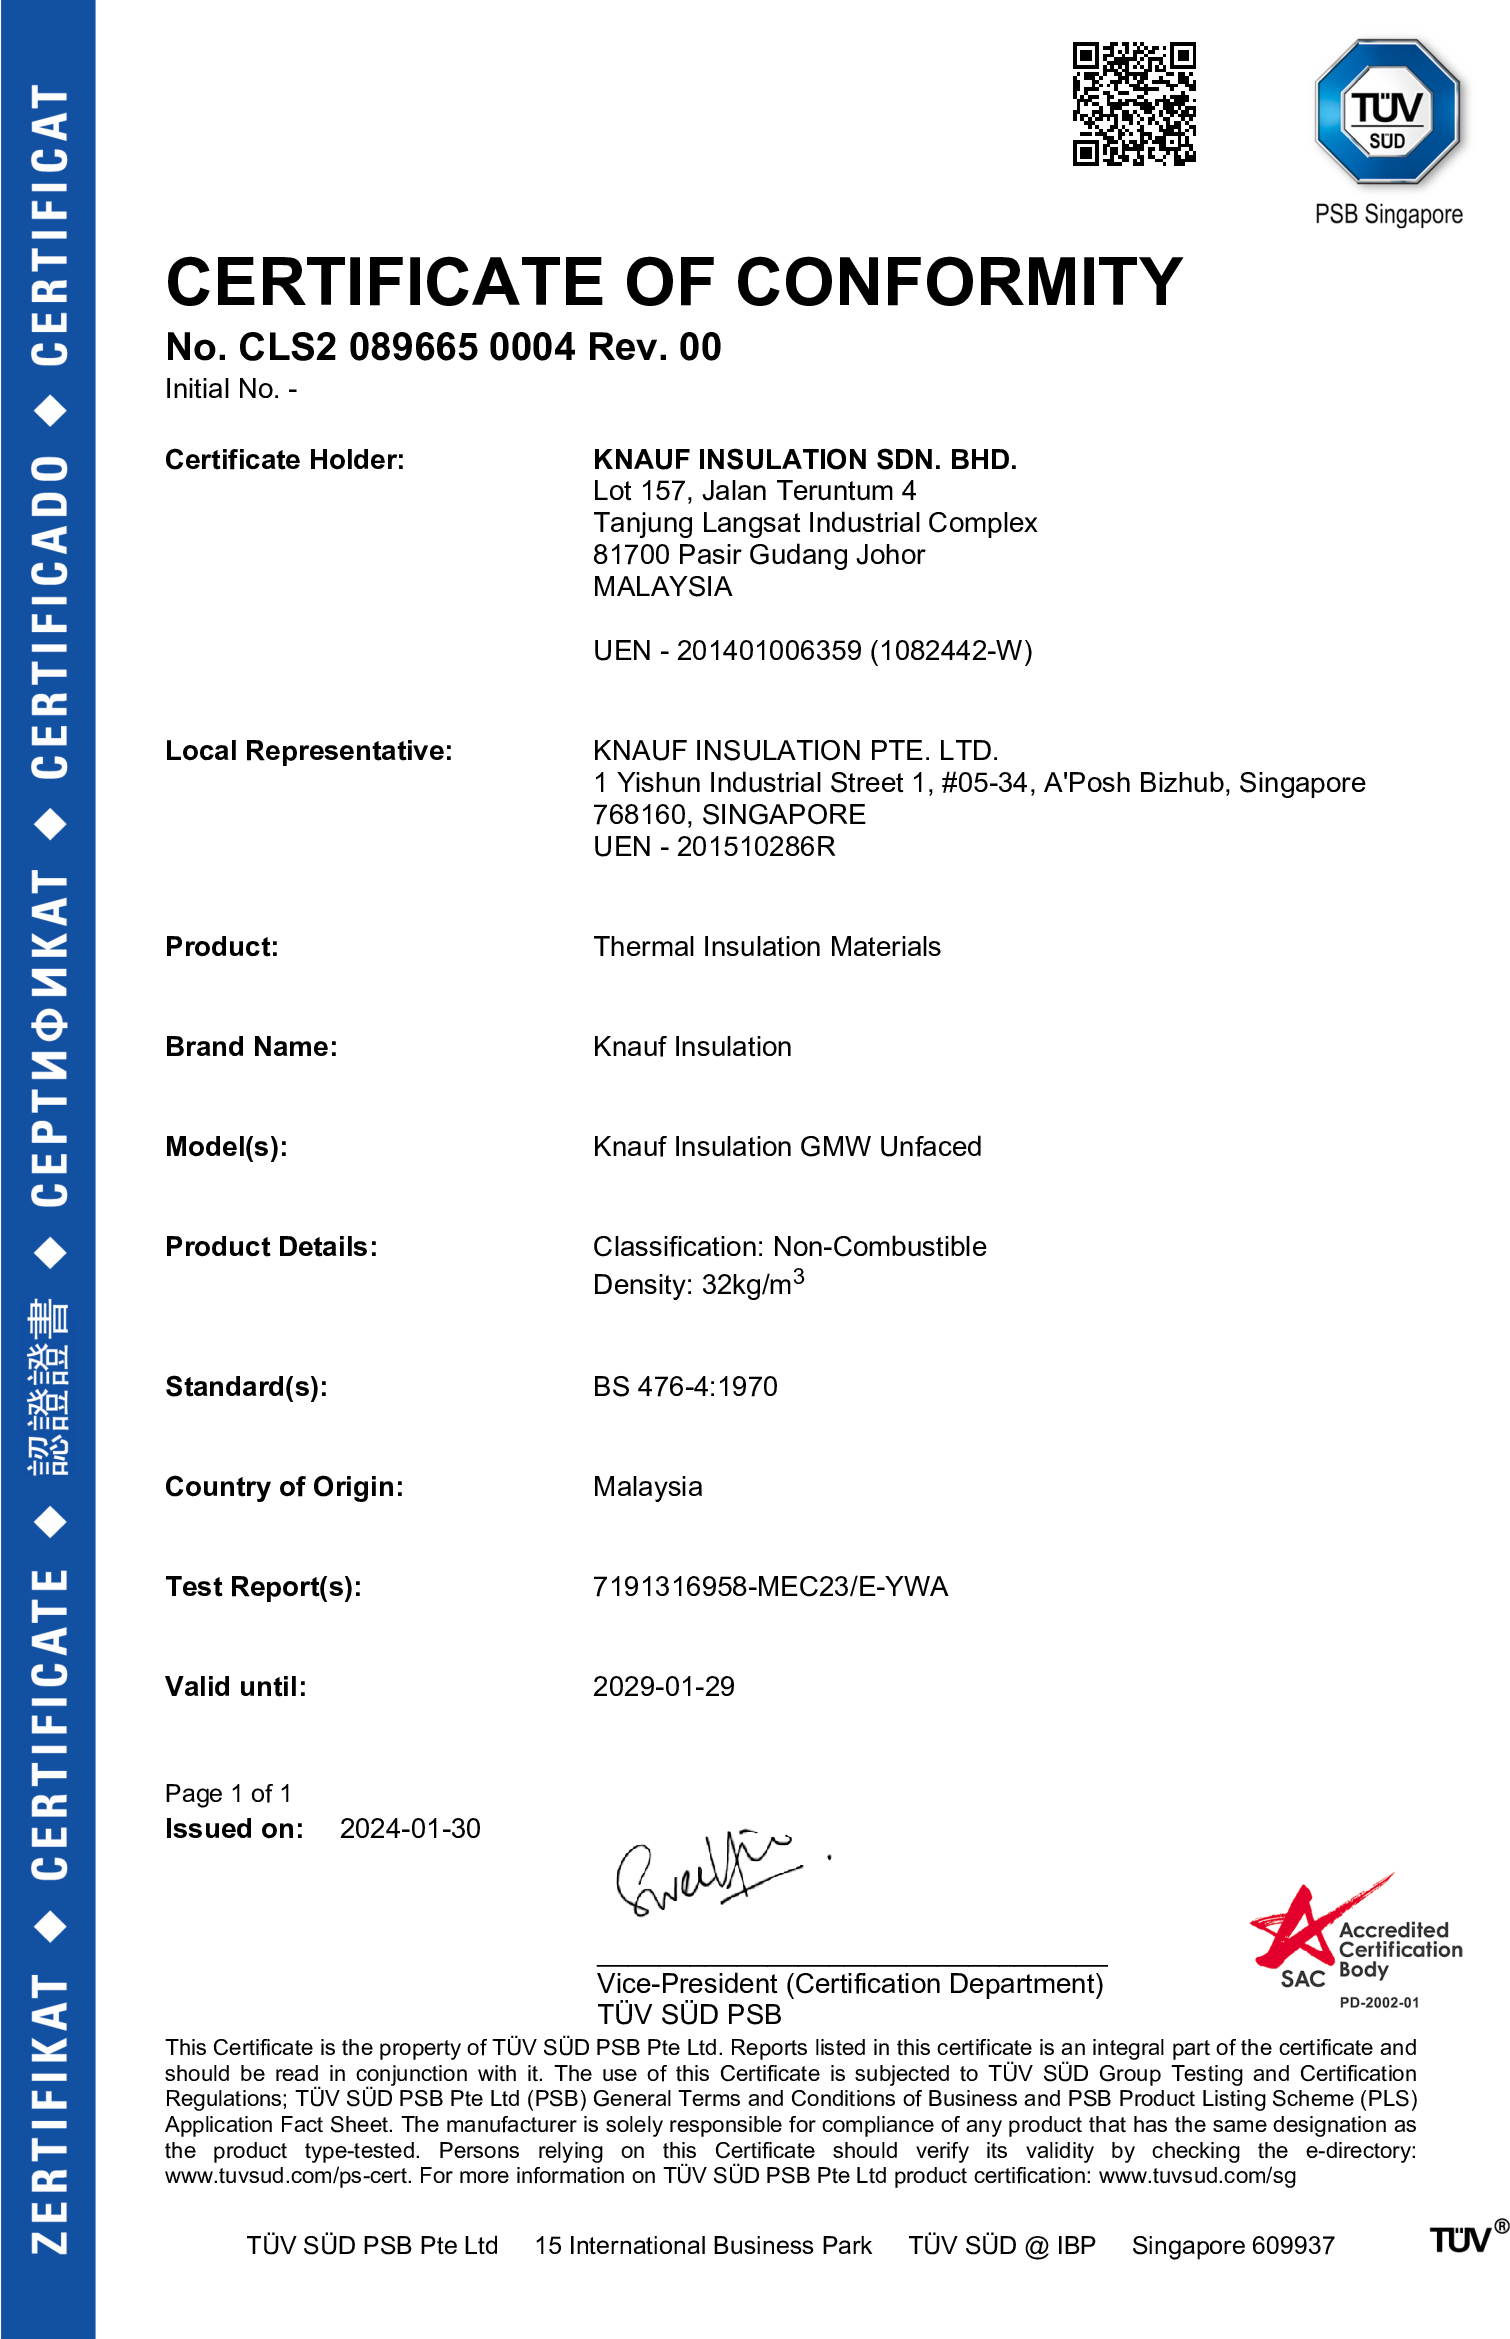 Unfaced Glasswool – Certificate of Conformity – 32kg/m3_25mm-BS476_Part 4